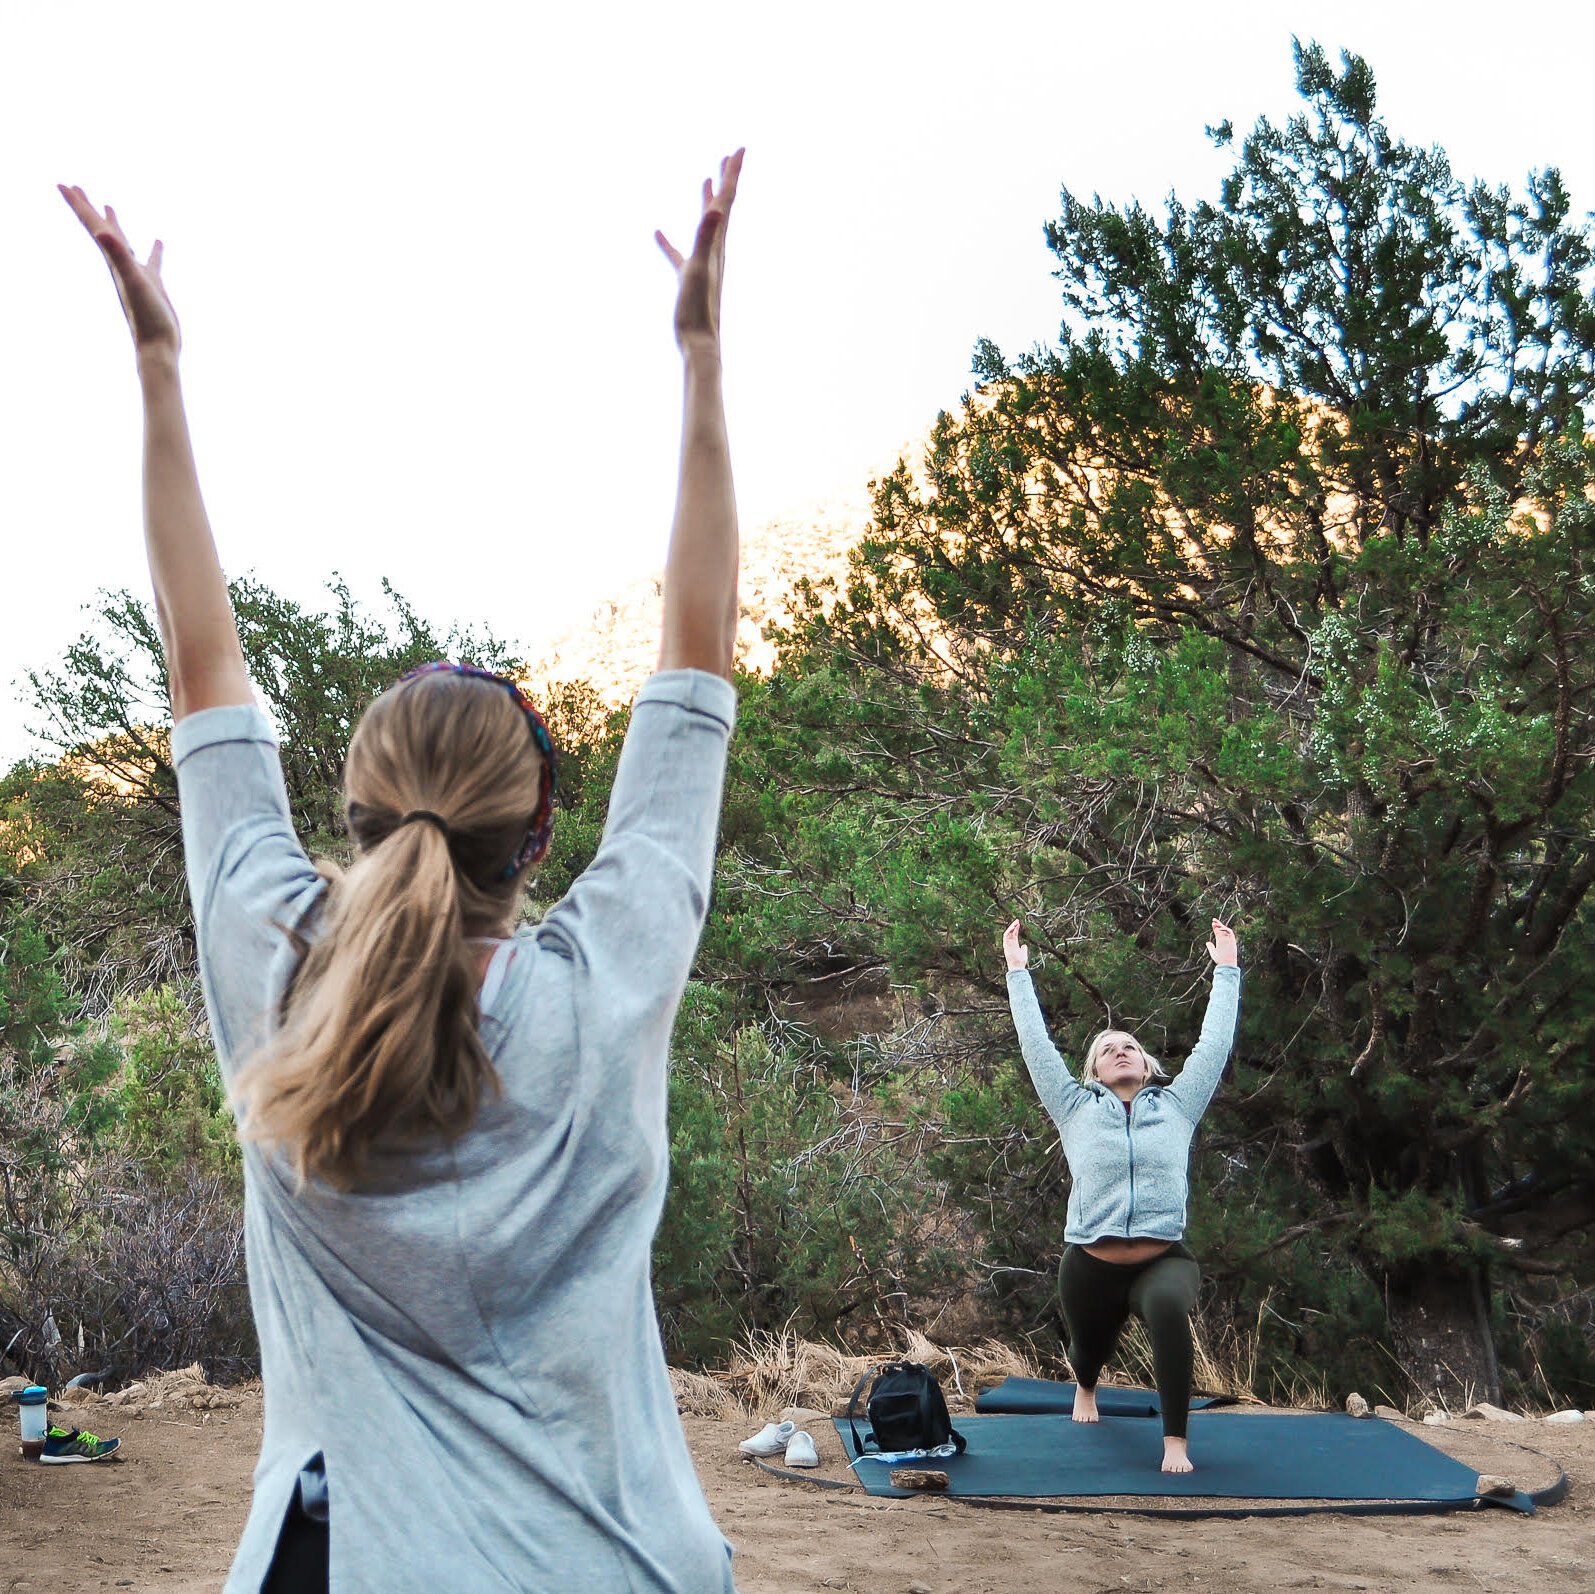 A woman teaching a yoga class in a natural, outdoor setting